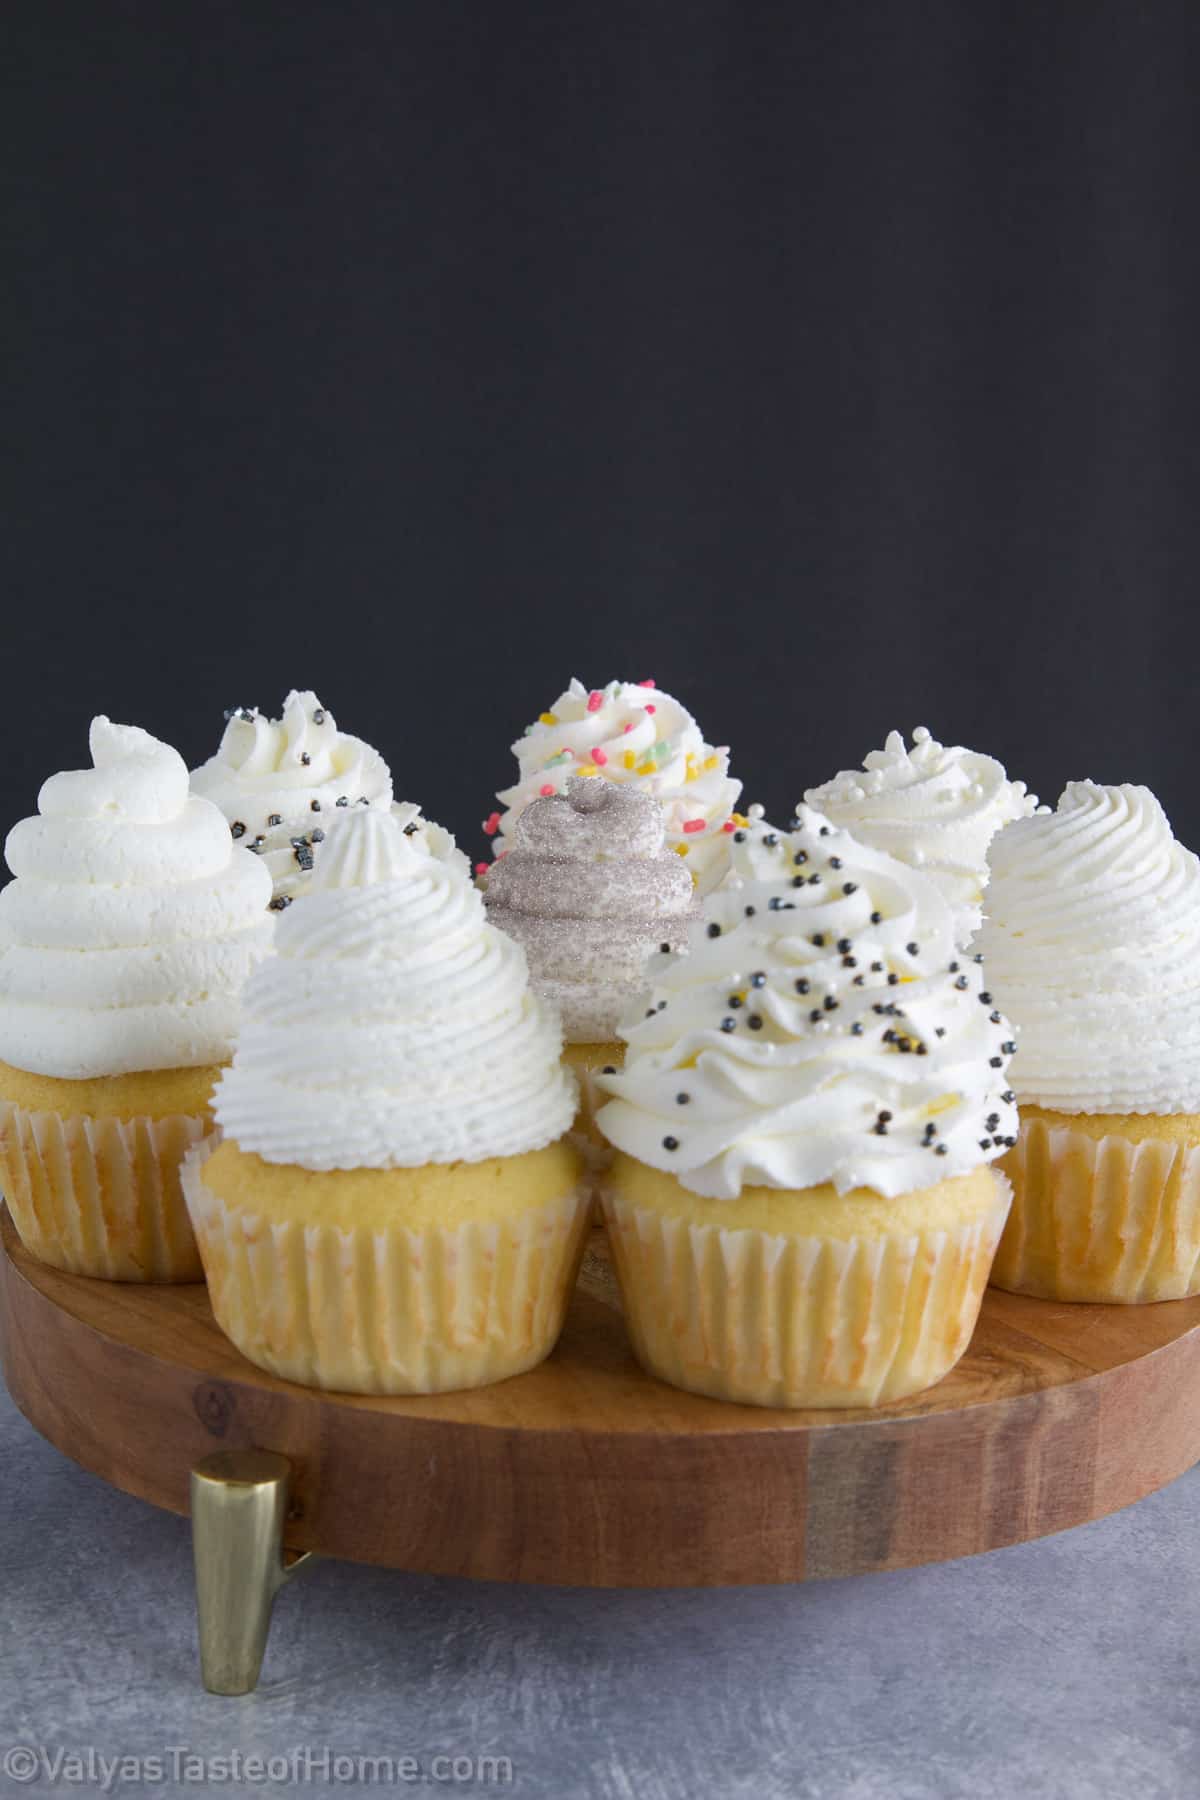 Frosting is the thick, fluffy mixture that tastes delicious and sweet and is often used as a coating or filling in cakes, cupcakes, and other desserts.